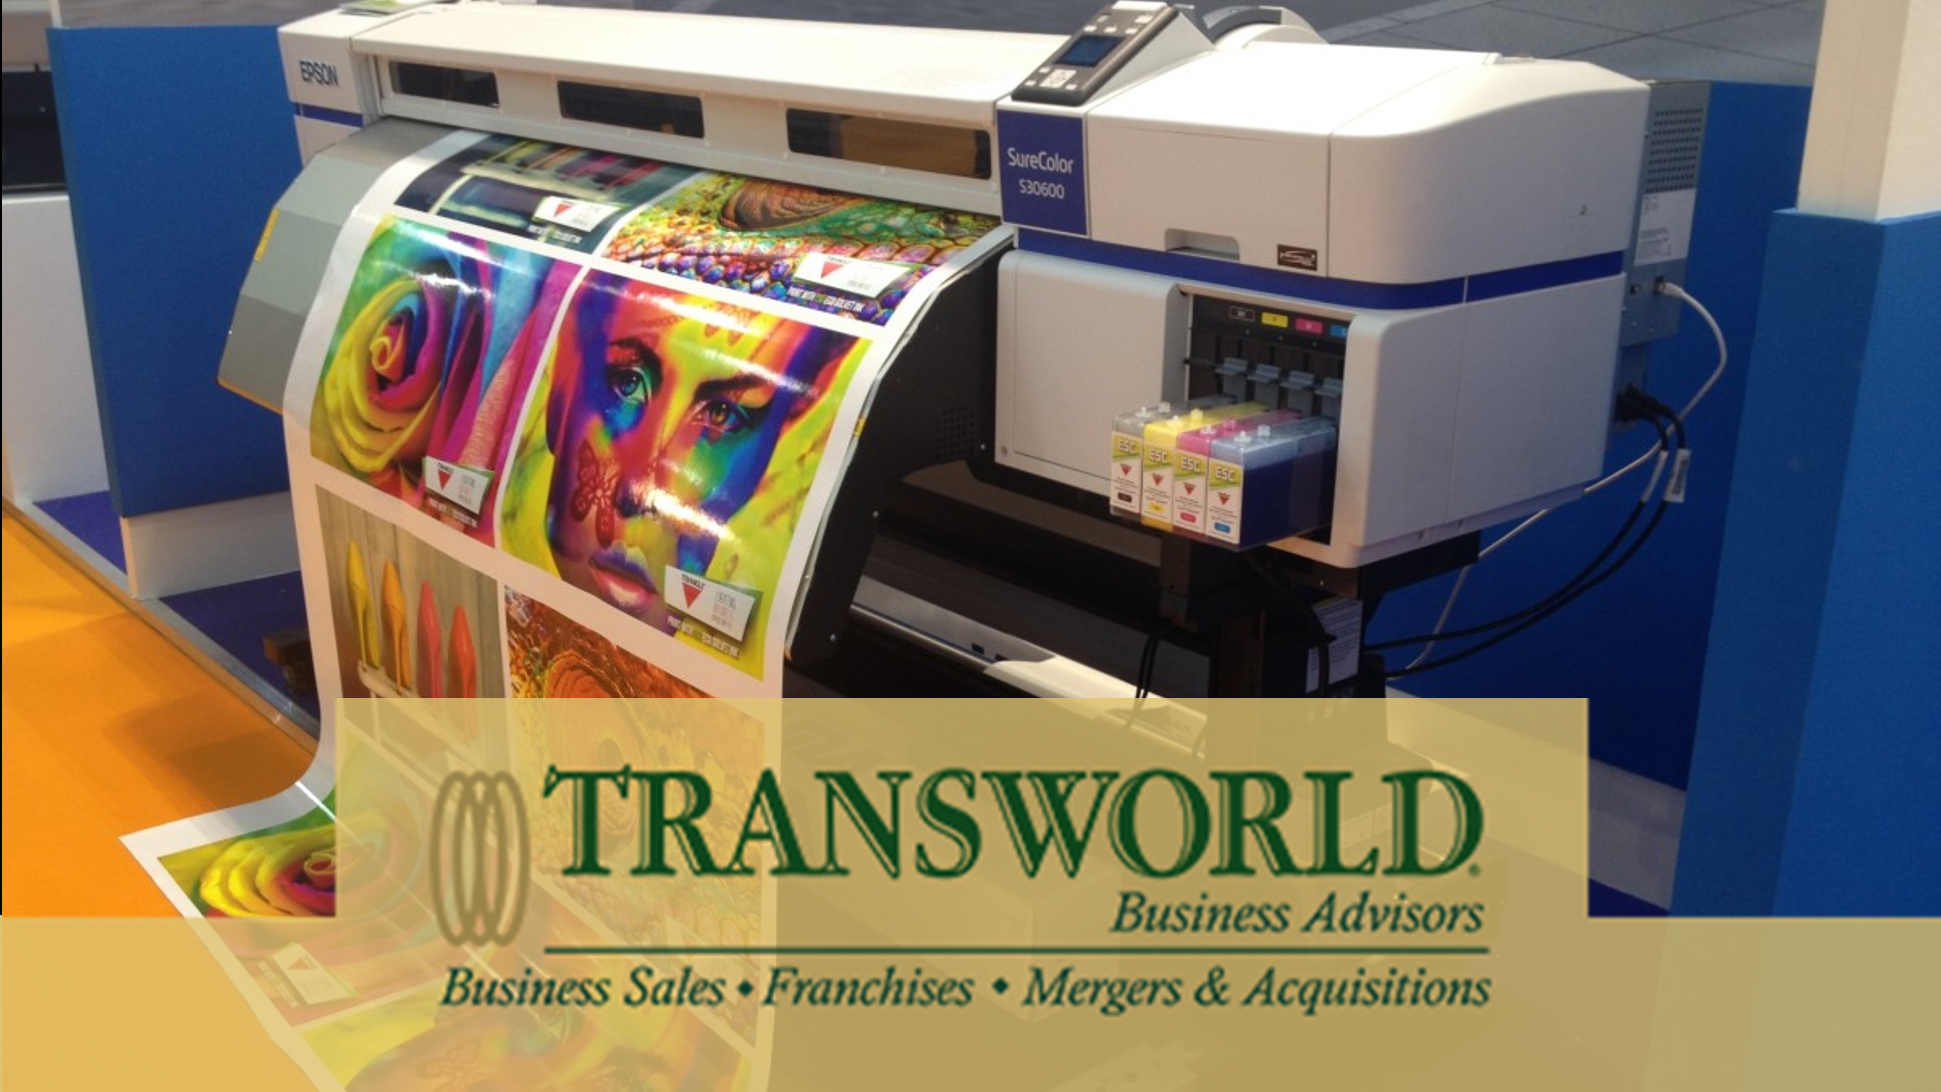 Semi-Absentee Printing Biz with Substantial Growth Potential